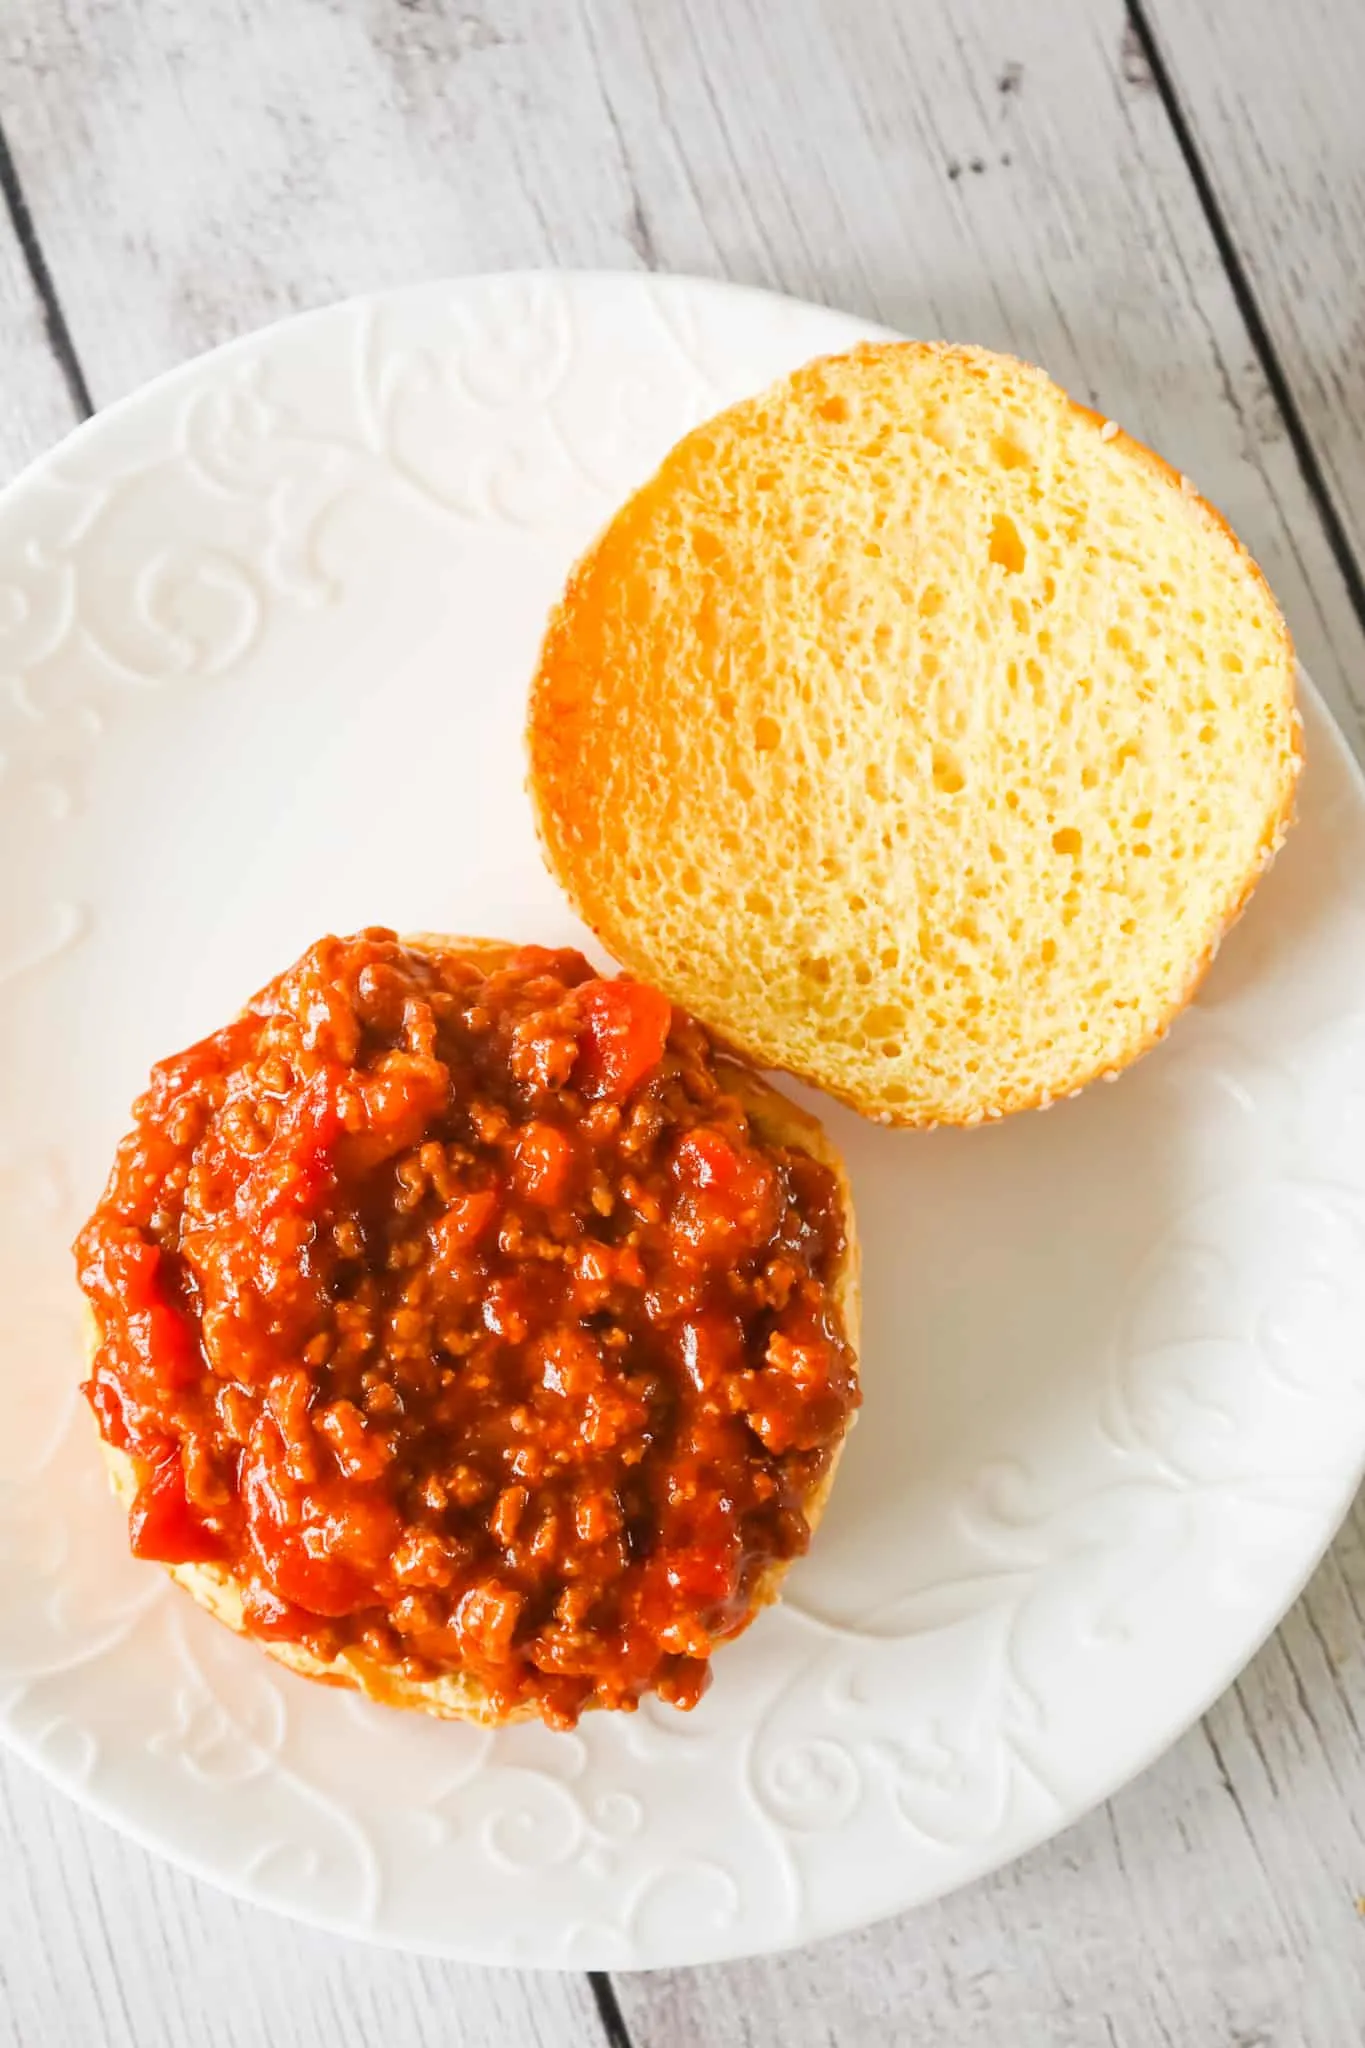 Instant Pot Sloppy Joes are an easy pressure cooker ground beef dinner recipe with a sauce made from diced tomatoes, ketchup, Worcestershire sauce and spices.